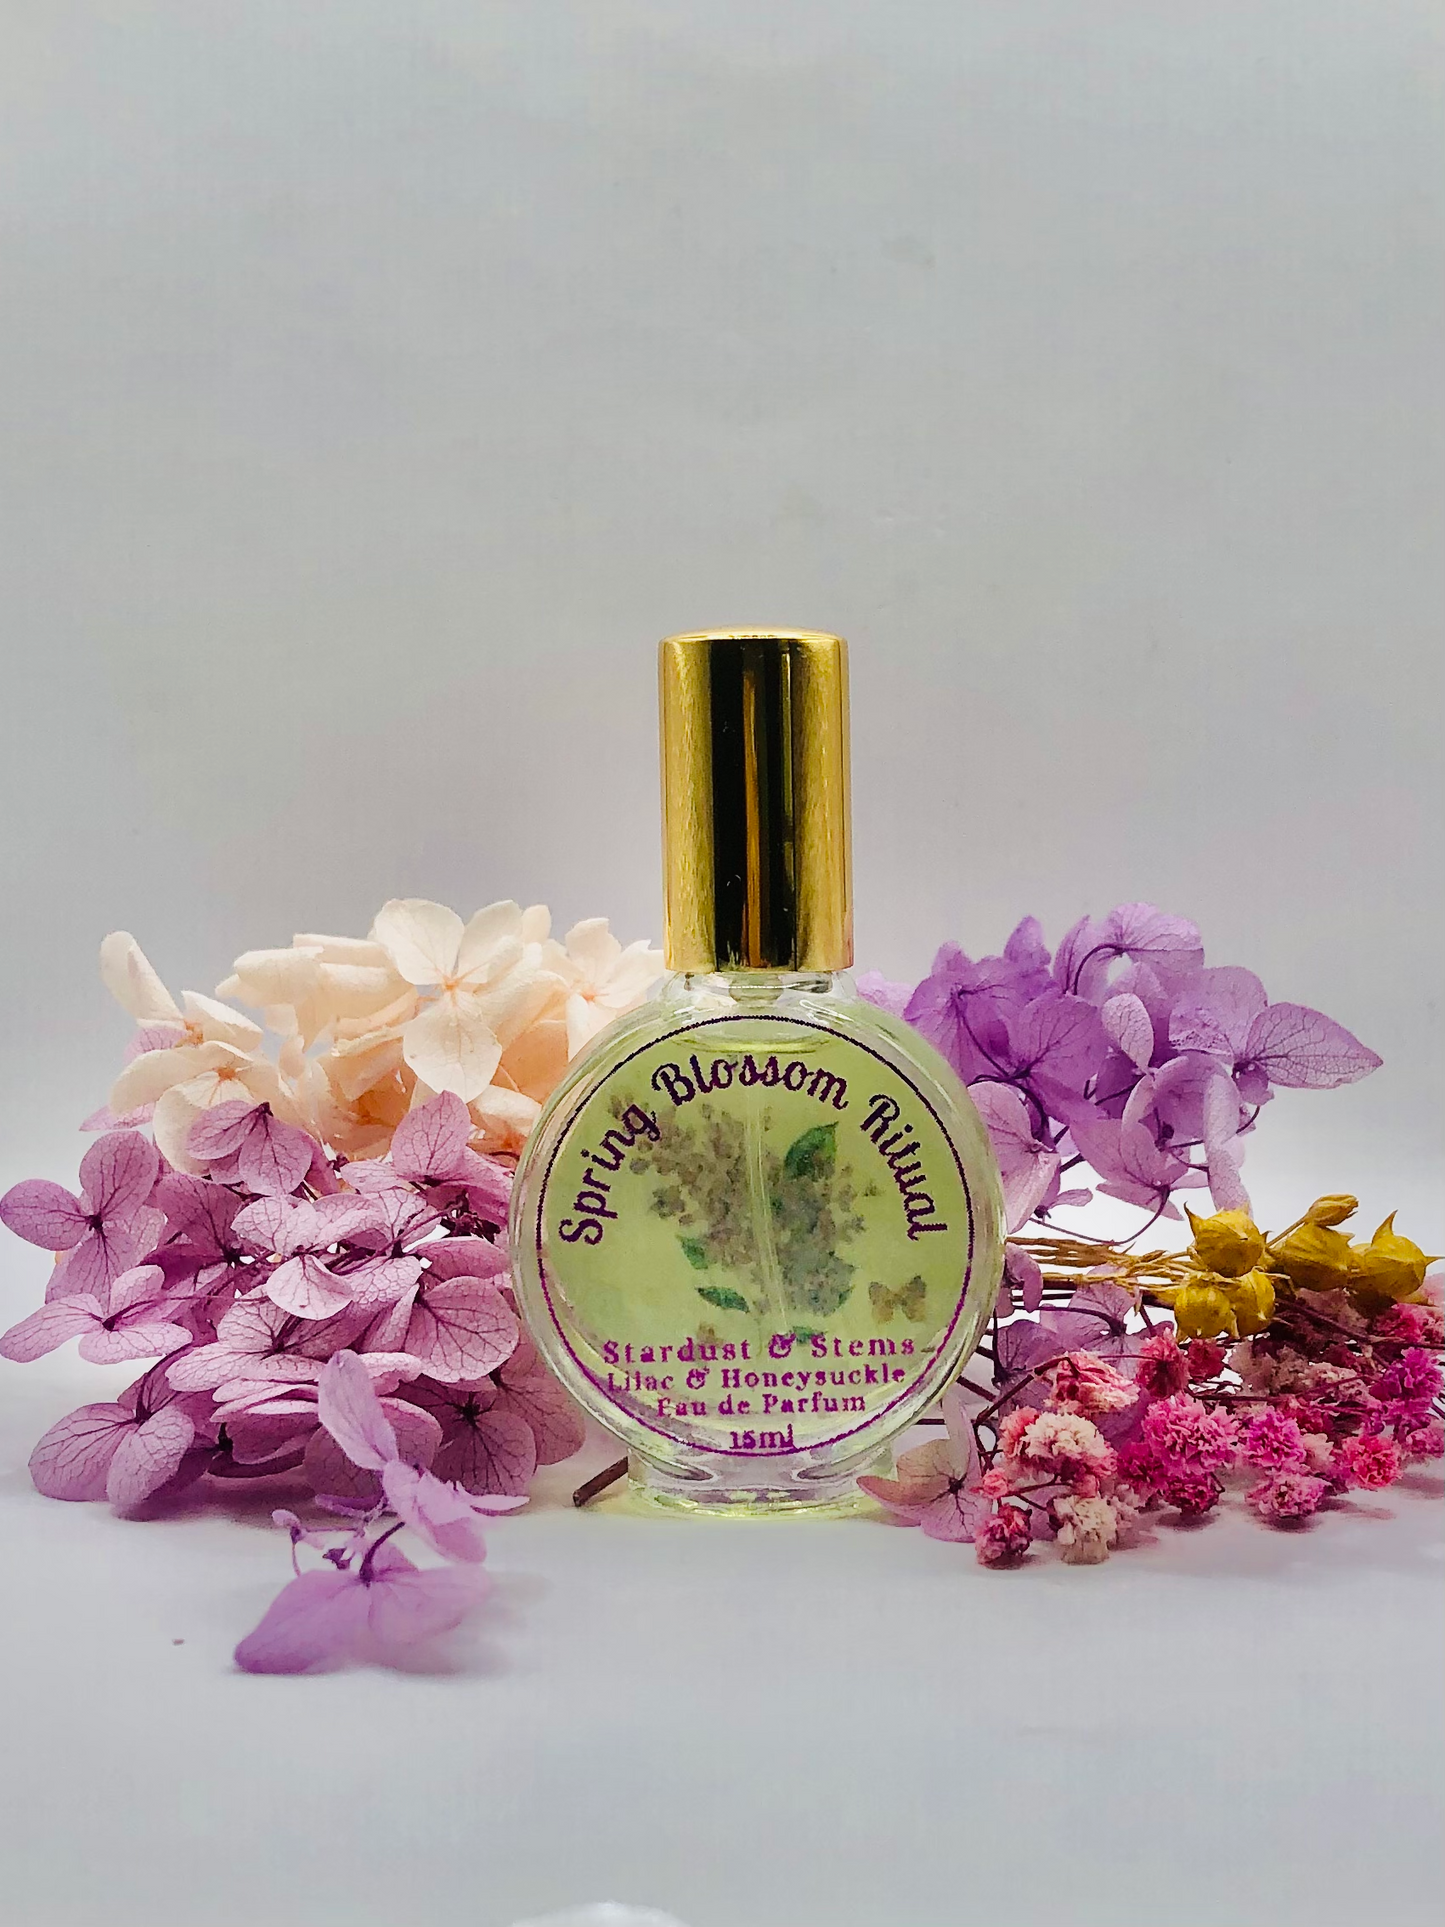 Lilac & Honeysuckle Perfume SPRING BLOSSOM RITUAL, Paraben Free Seasonal Essential Oil Indie Scent, Witchy Magick Fairycore Cottagecore Gift